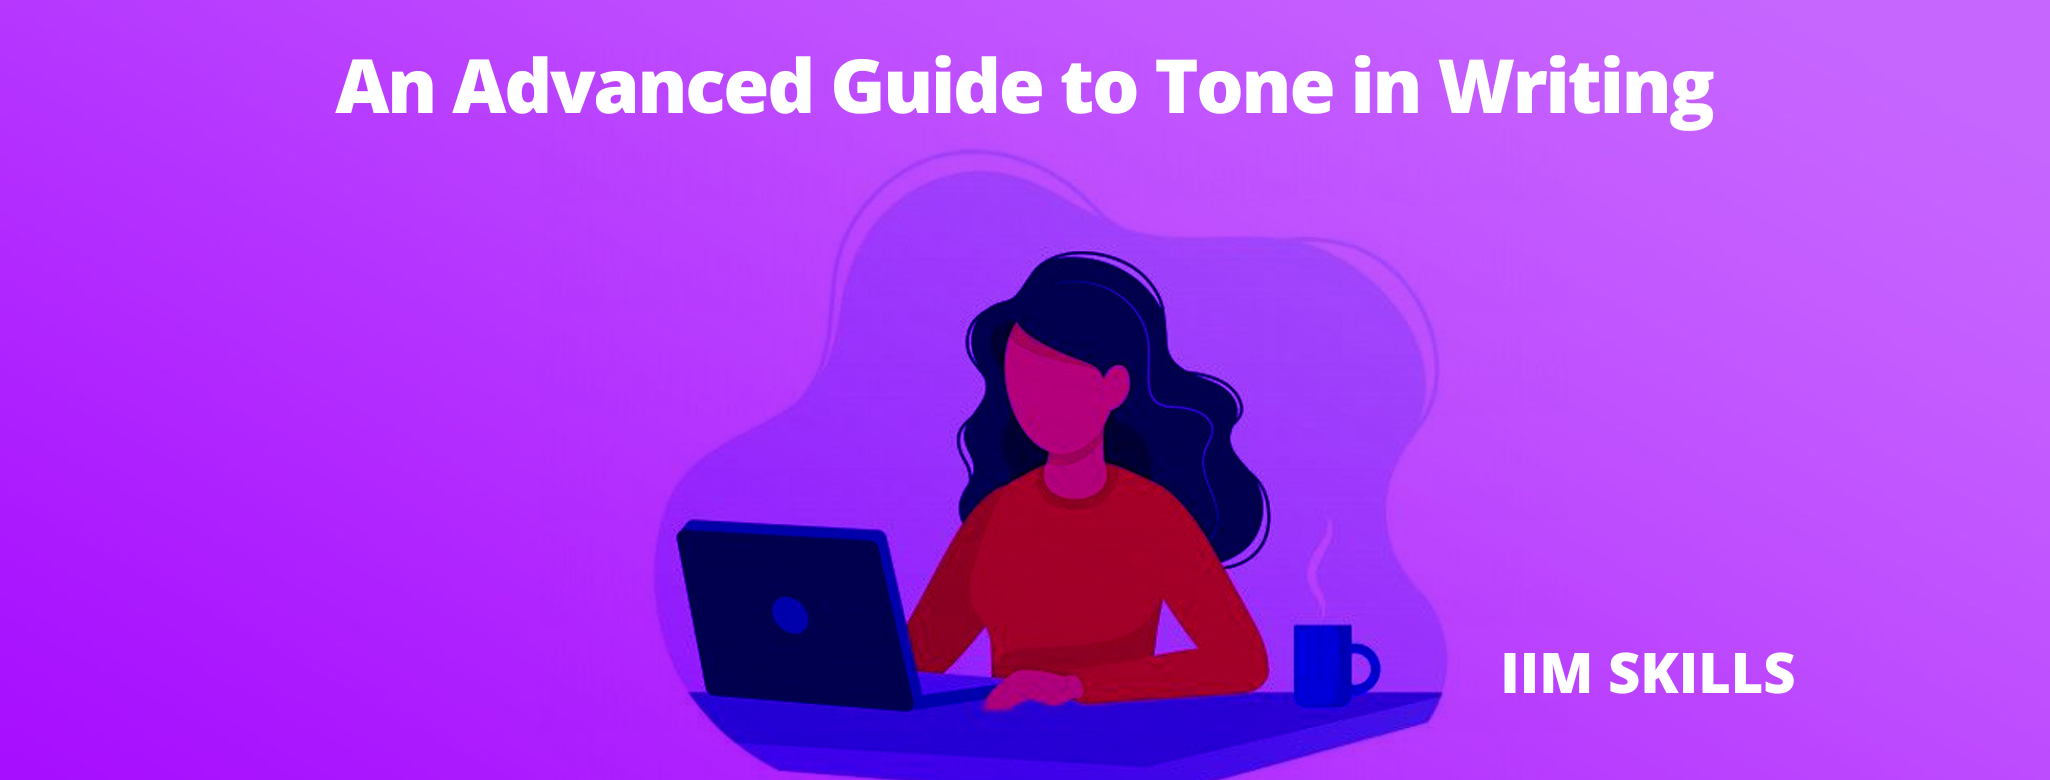 An Advanced Guide to Tone in Writing